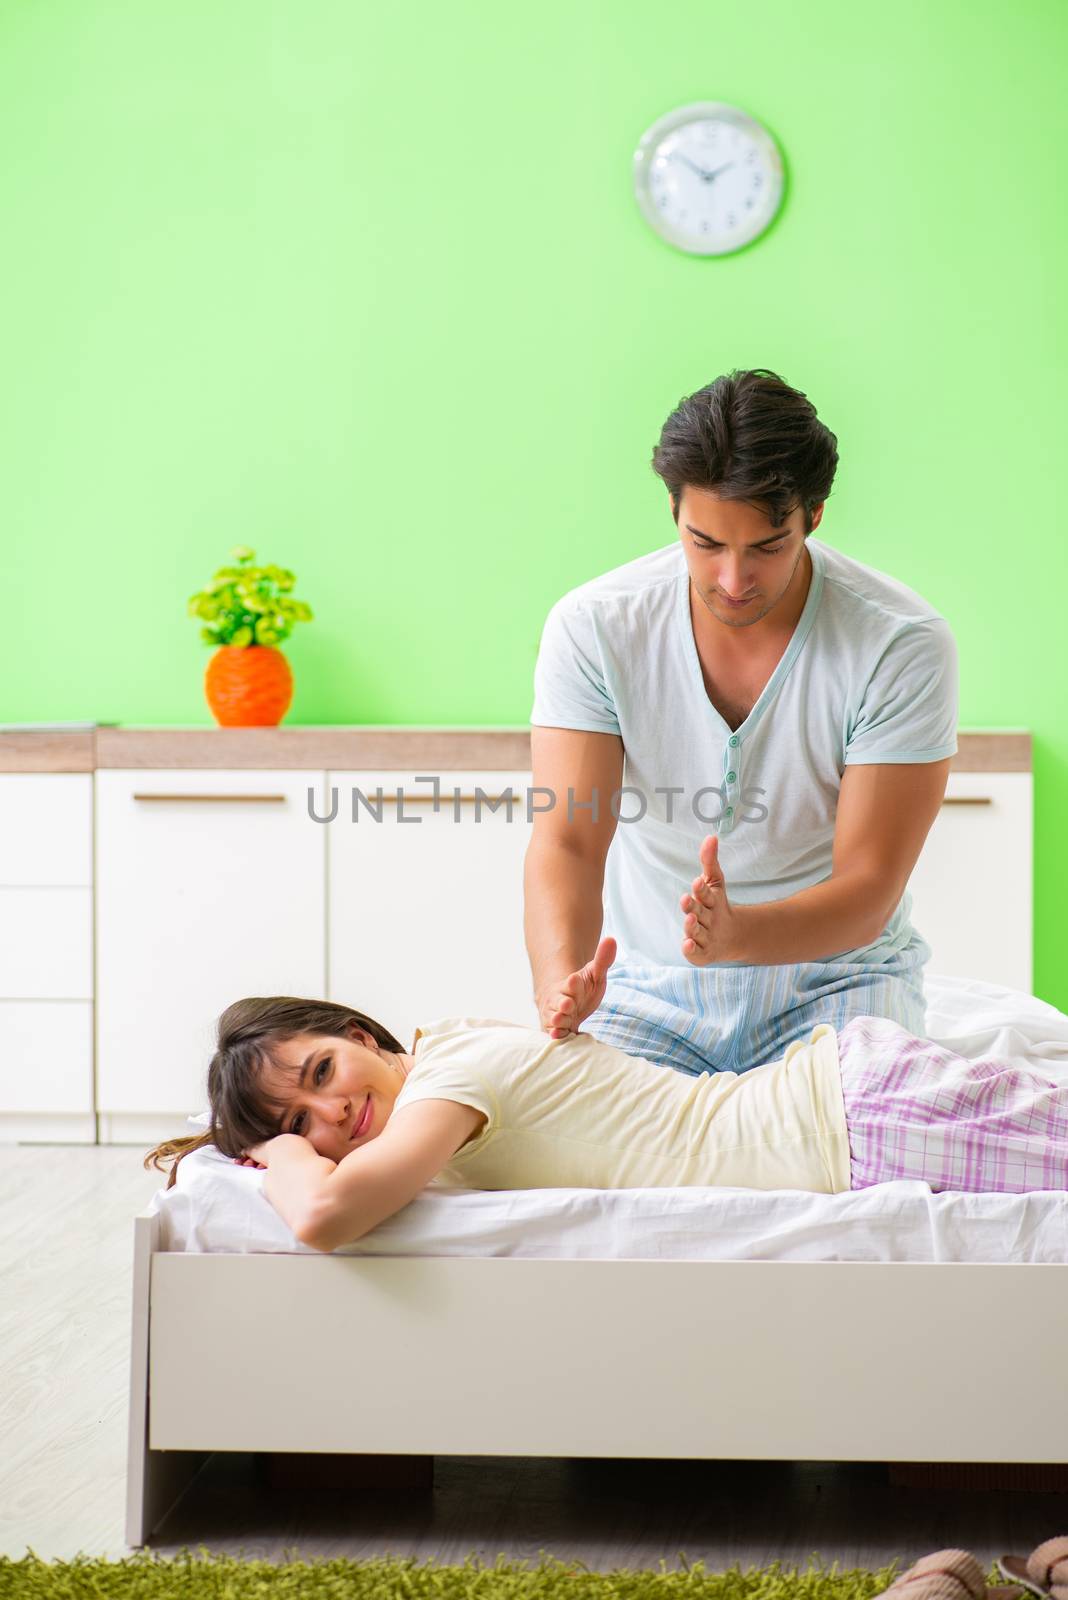 Man doing massage to his wife in bedroom 